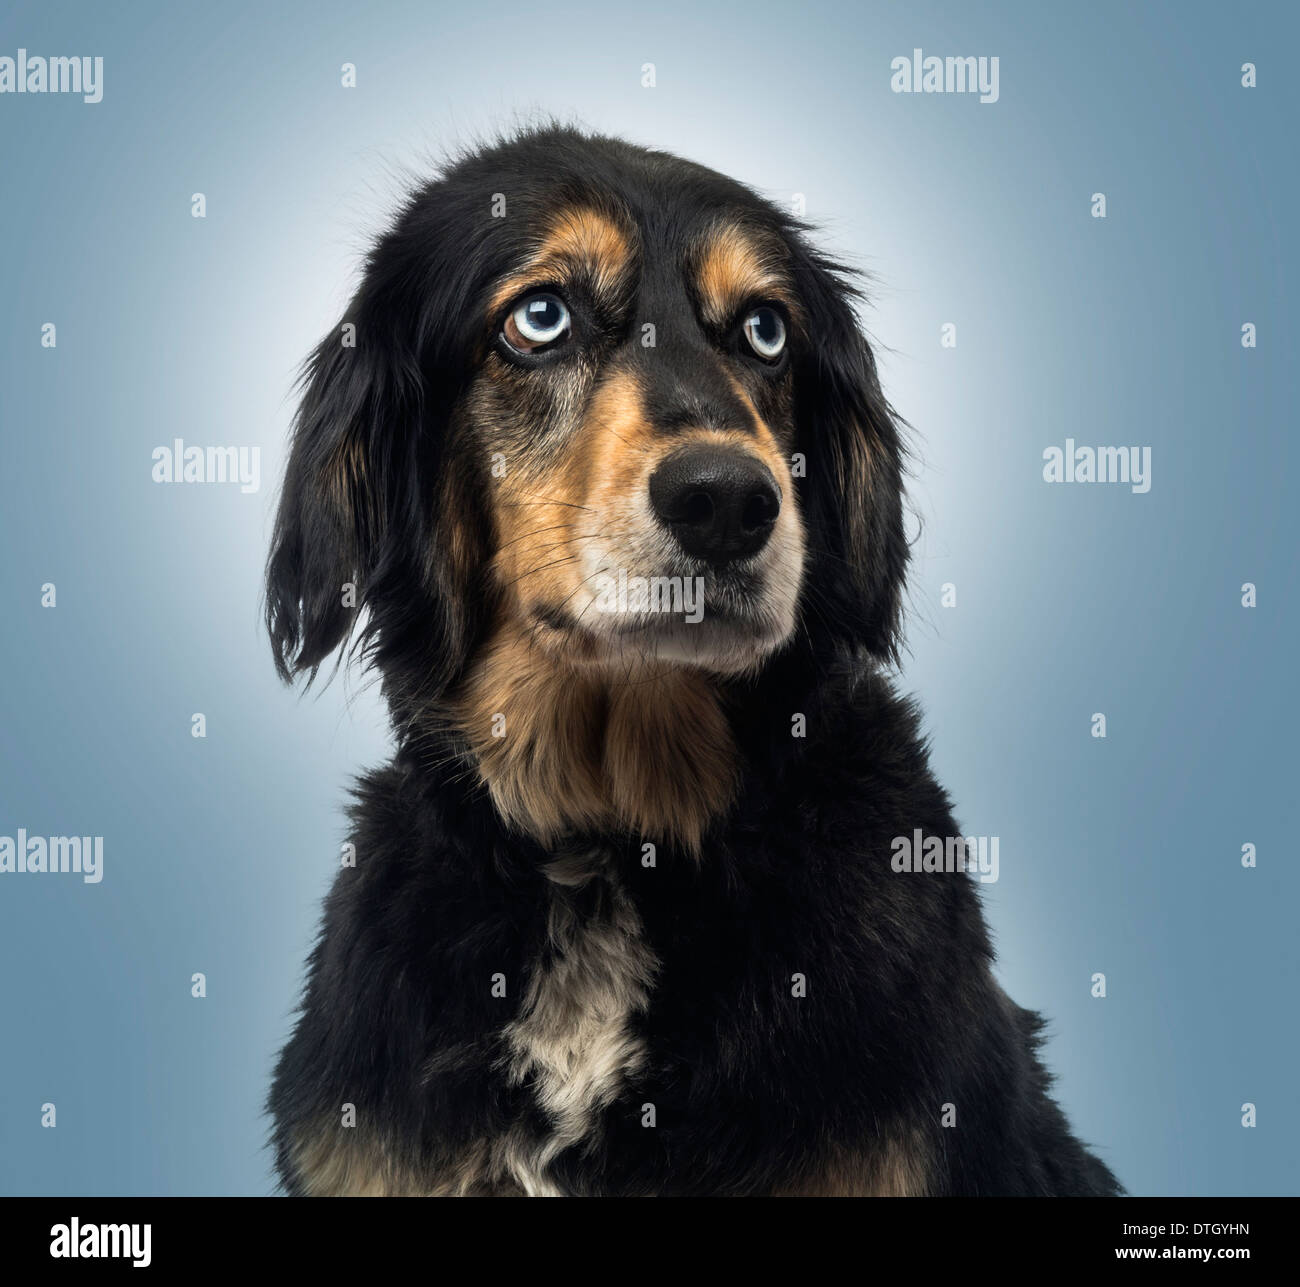 Crossbreed dog looking up on a blue gradient background Stock Photo